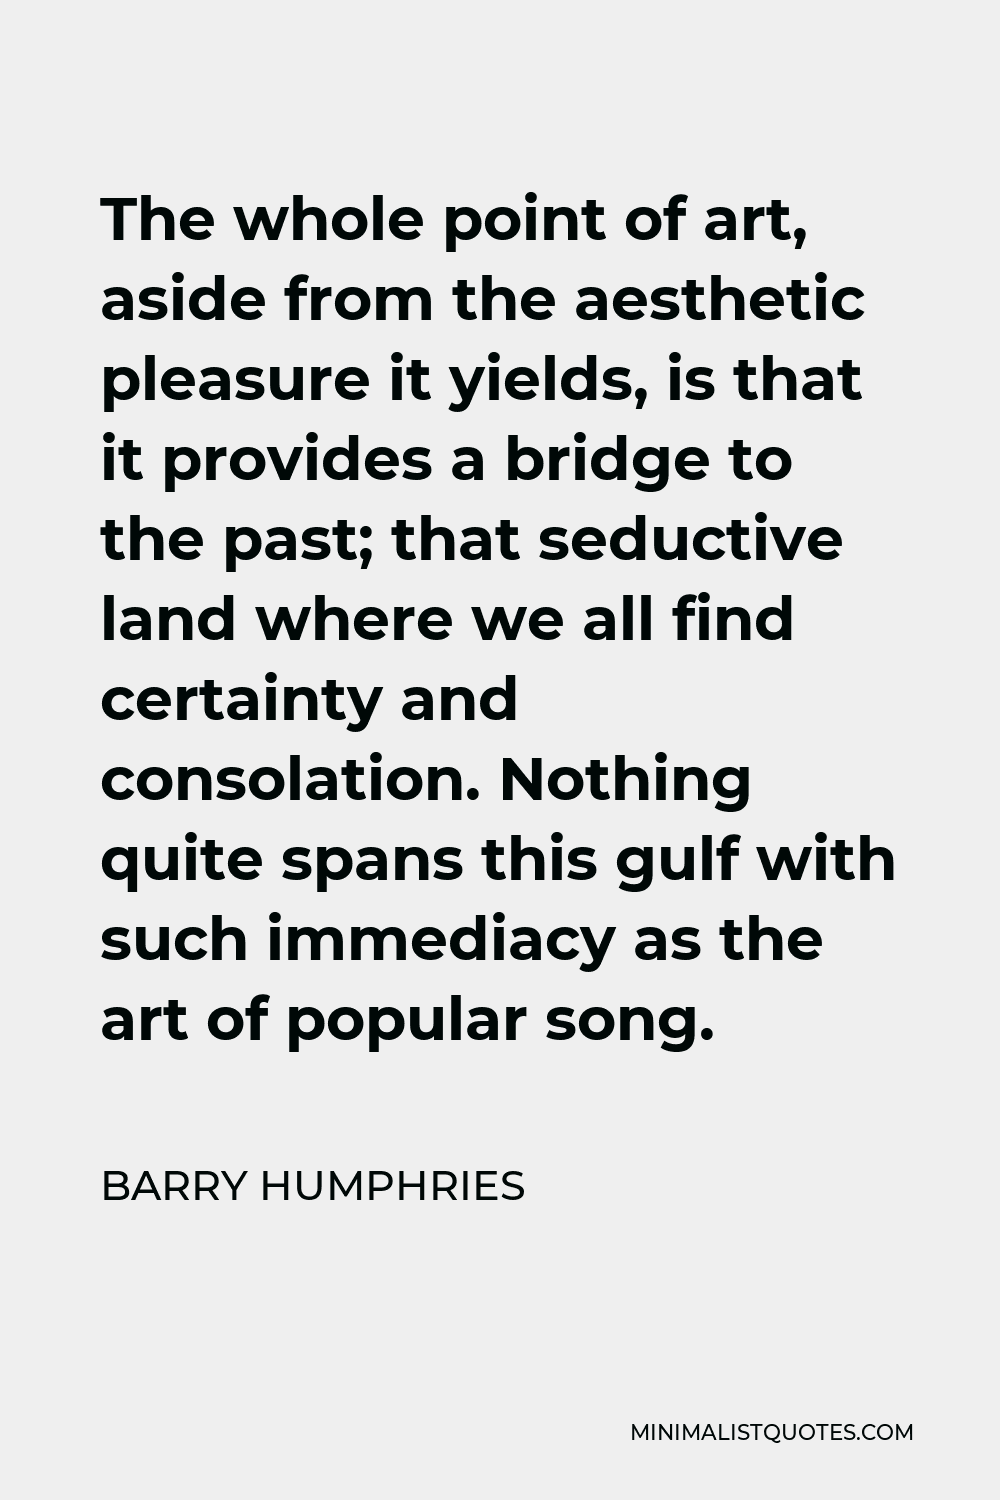 Barry Humphries Quote - The whole point of art, aside from the aesthetic pleasure it yields, is that it provides a bridge to the past; that seductive land where we all find certainty and consolation. Nothing quite spans this gulf with such immediacy as the art of popular song.